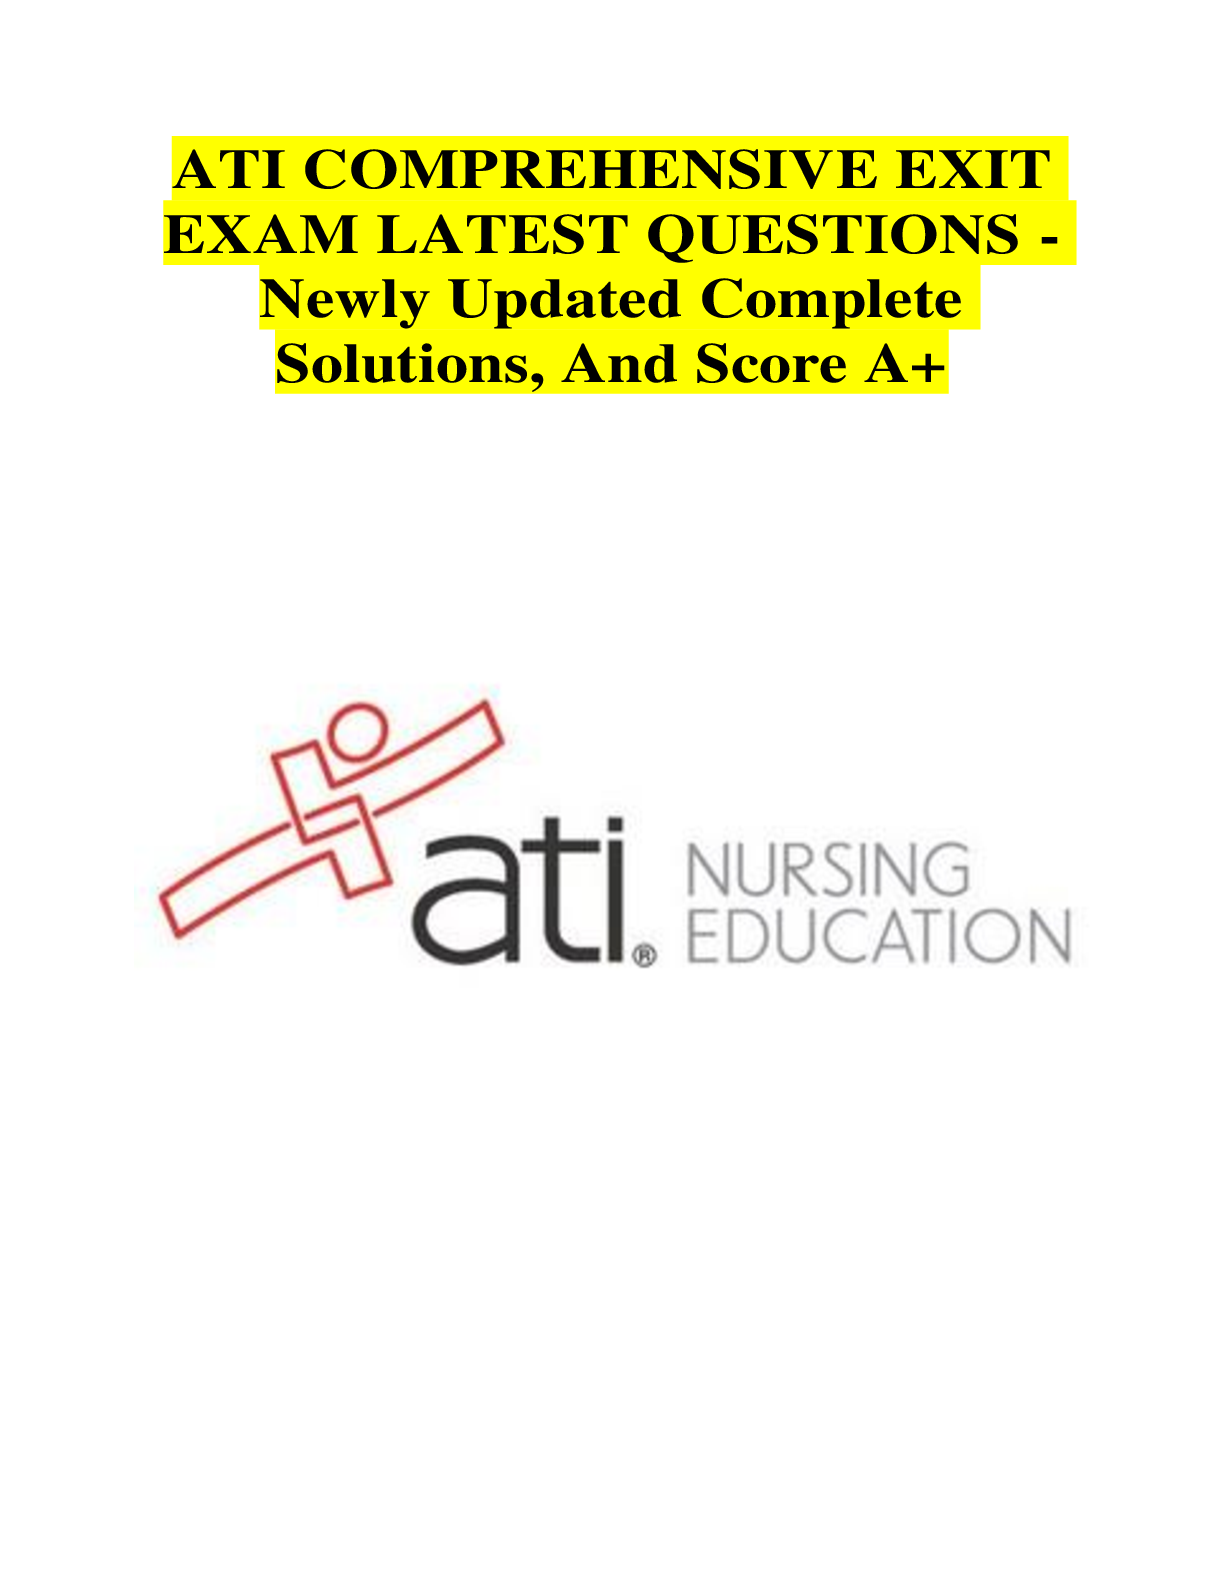 ATI COMPREHENSIVE EXIT EXAM LATEST QUESTIONS Newly Updated Complete